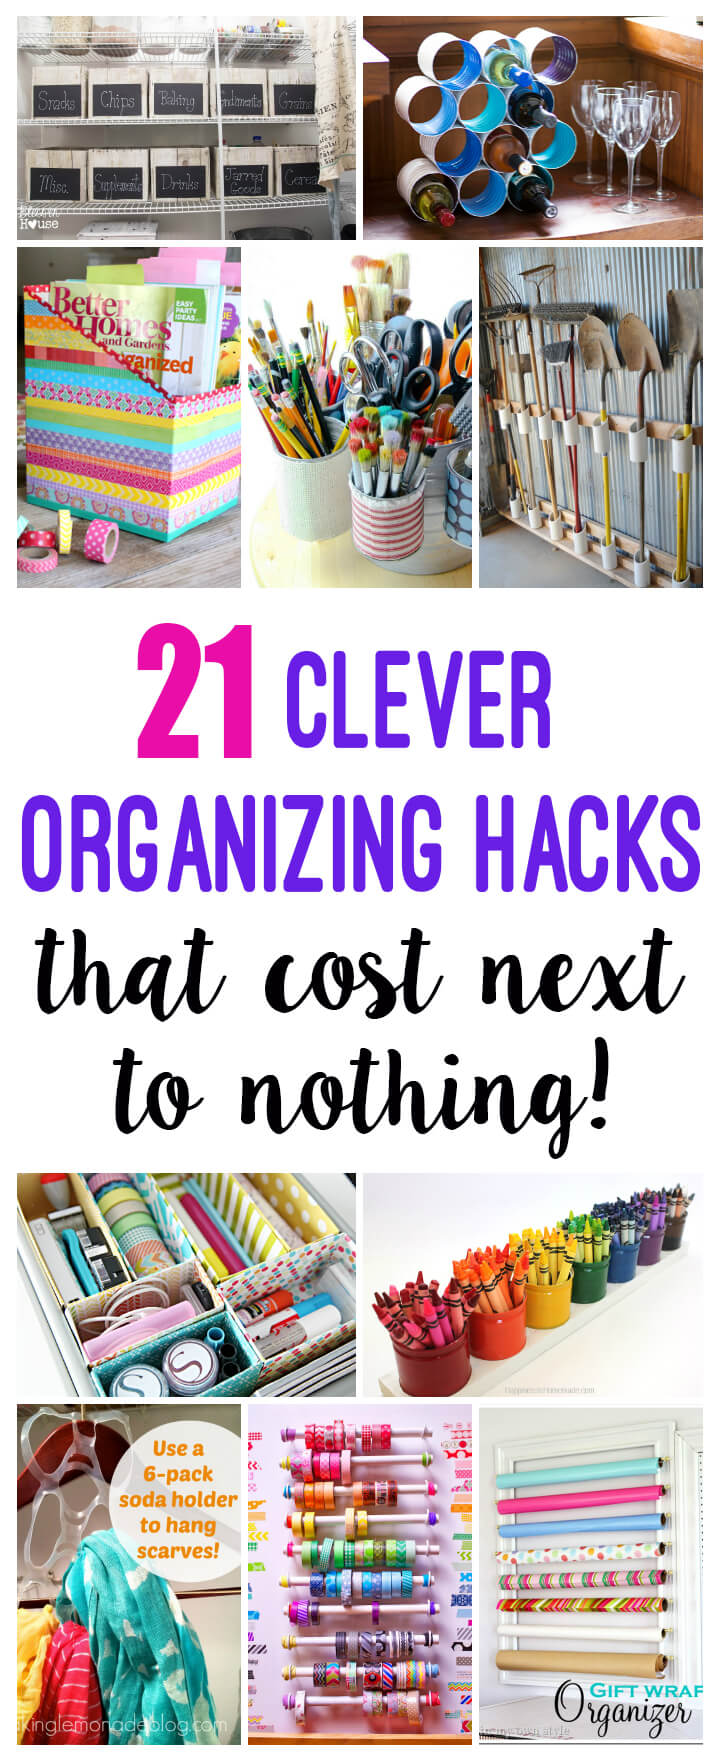 https://www.happinessishomemade.net/wp-content/uploads/2016/01/21-Clever-Organization-Hacks-and-Storage-Solutions-That-Cost-Next-to-Nothing.jpg